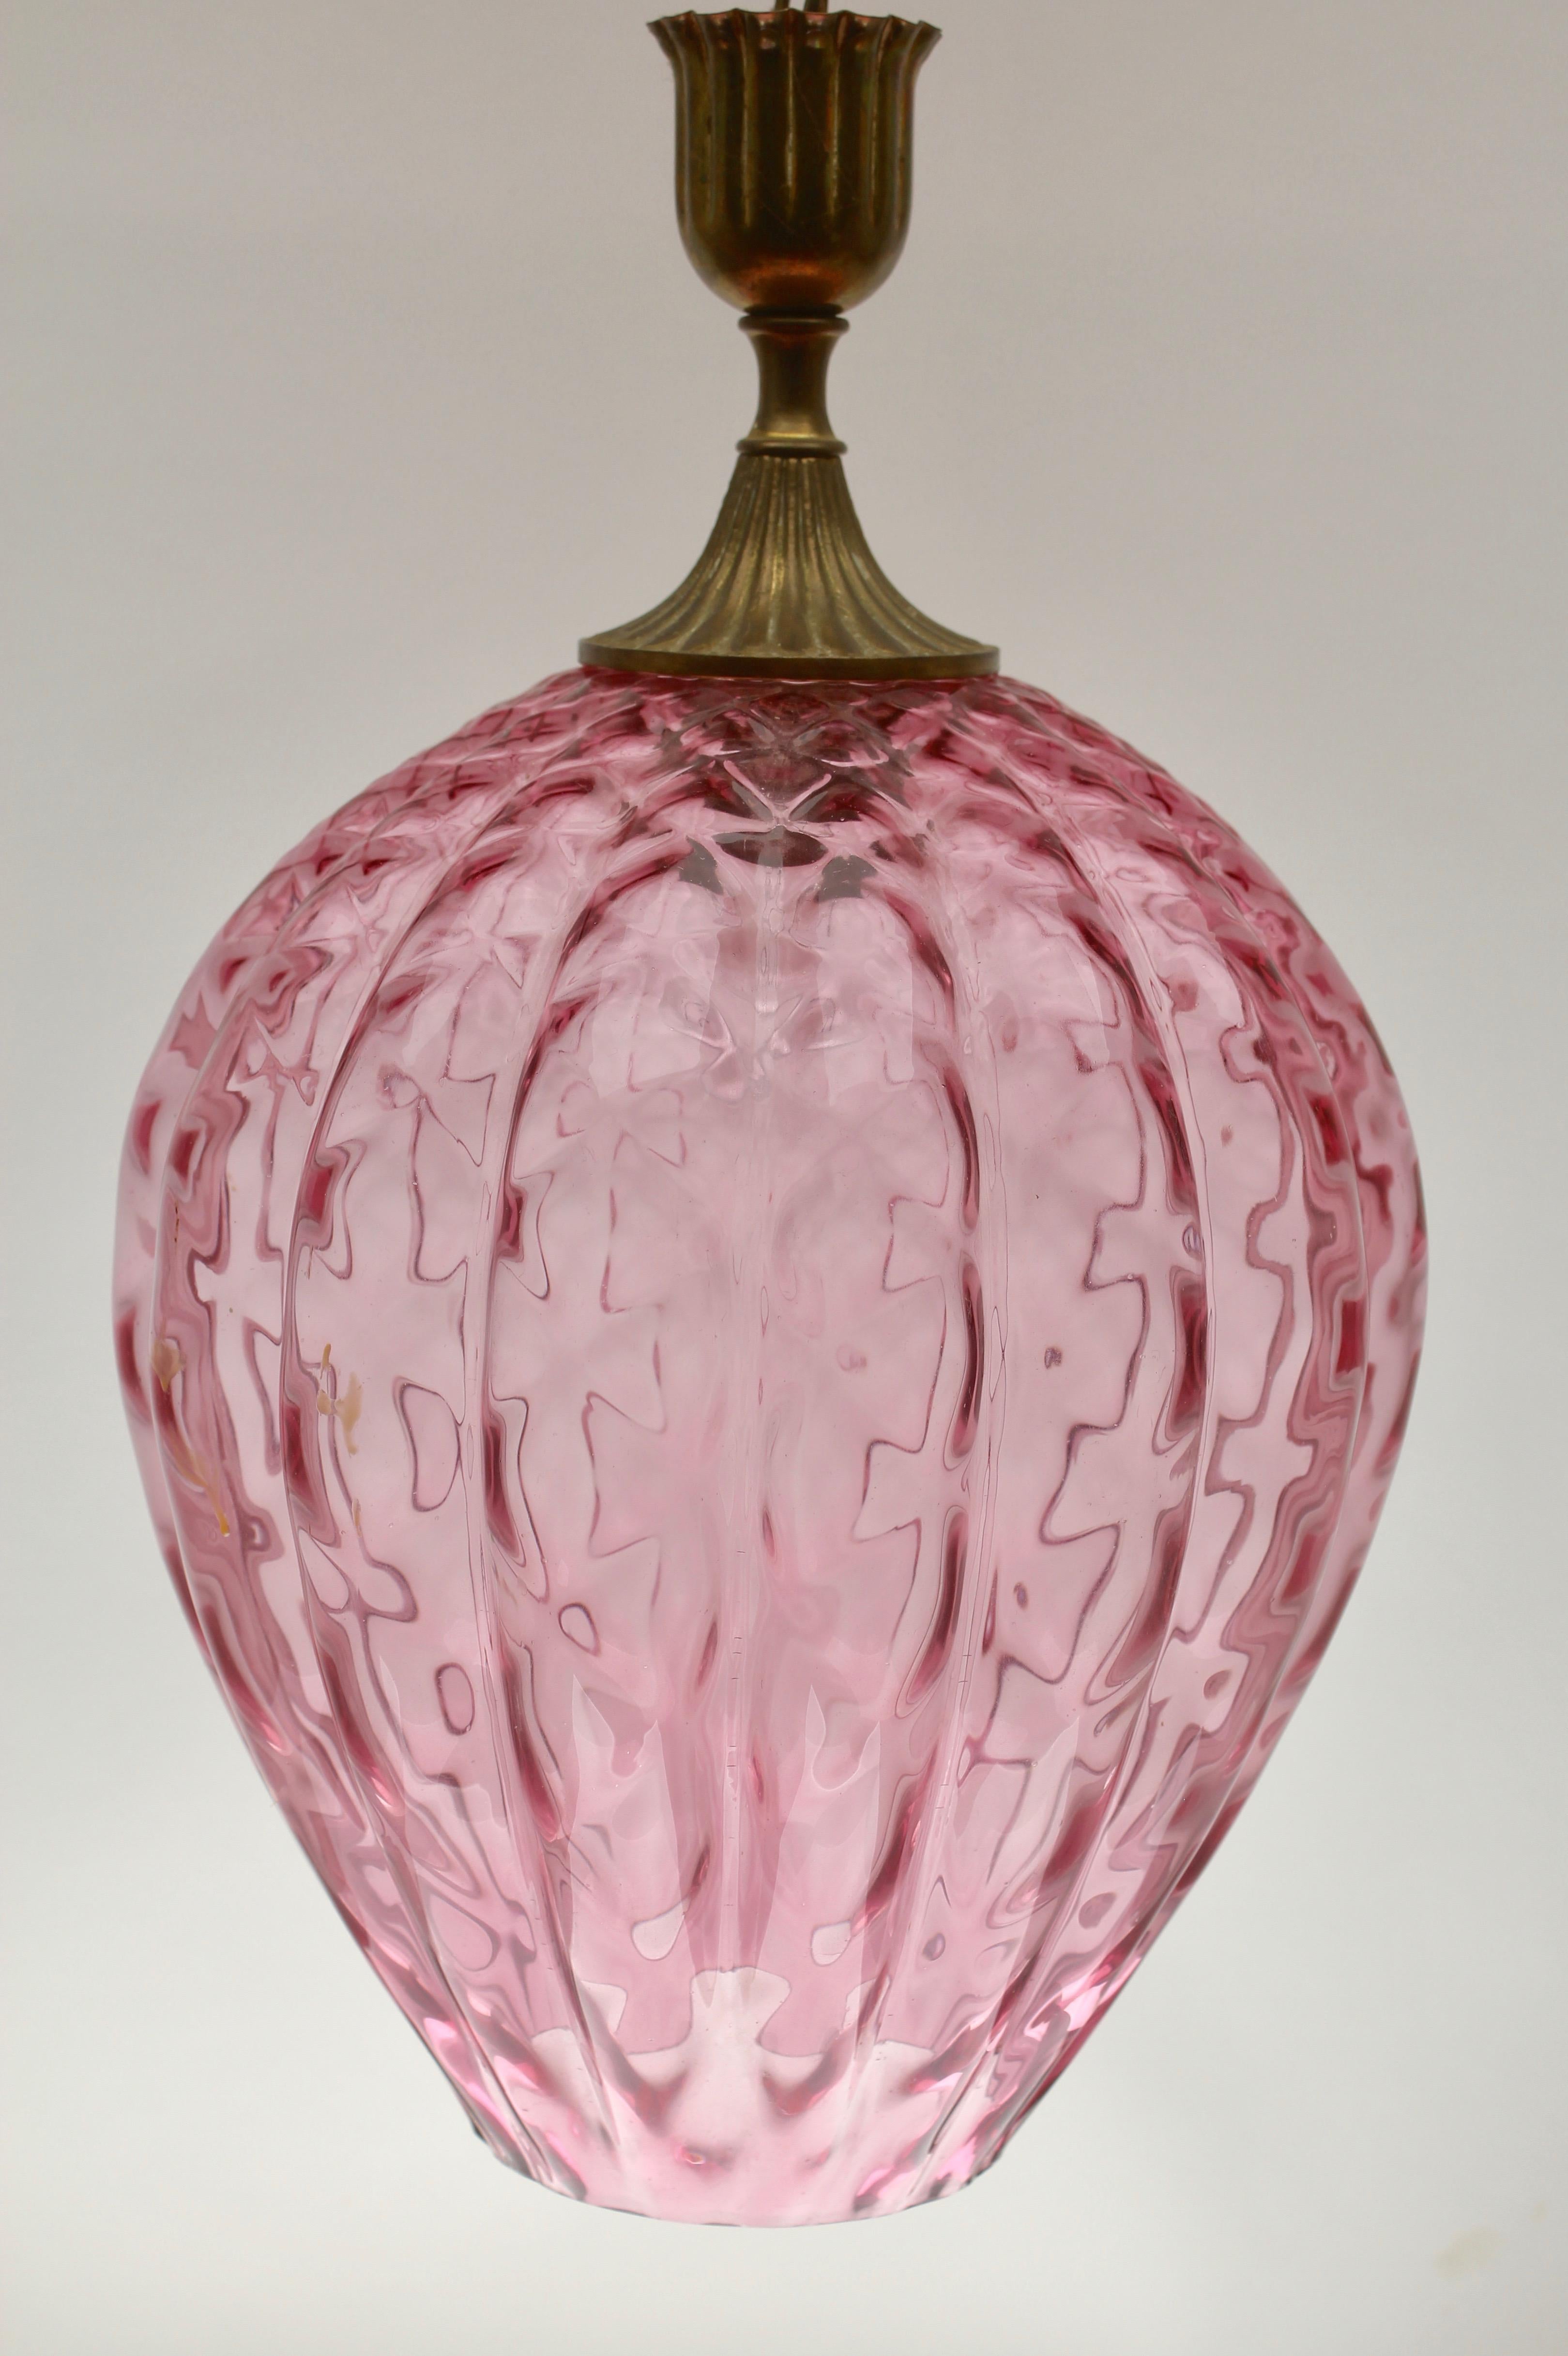 Hand-Crafted Empoli Glass Pendant Lamp with Vertical Ribs & Diamond Optic in Rosaline 'Pink'